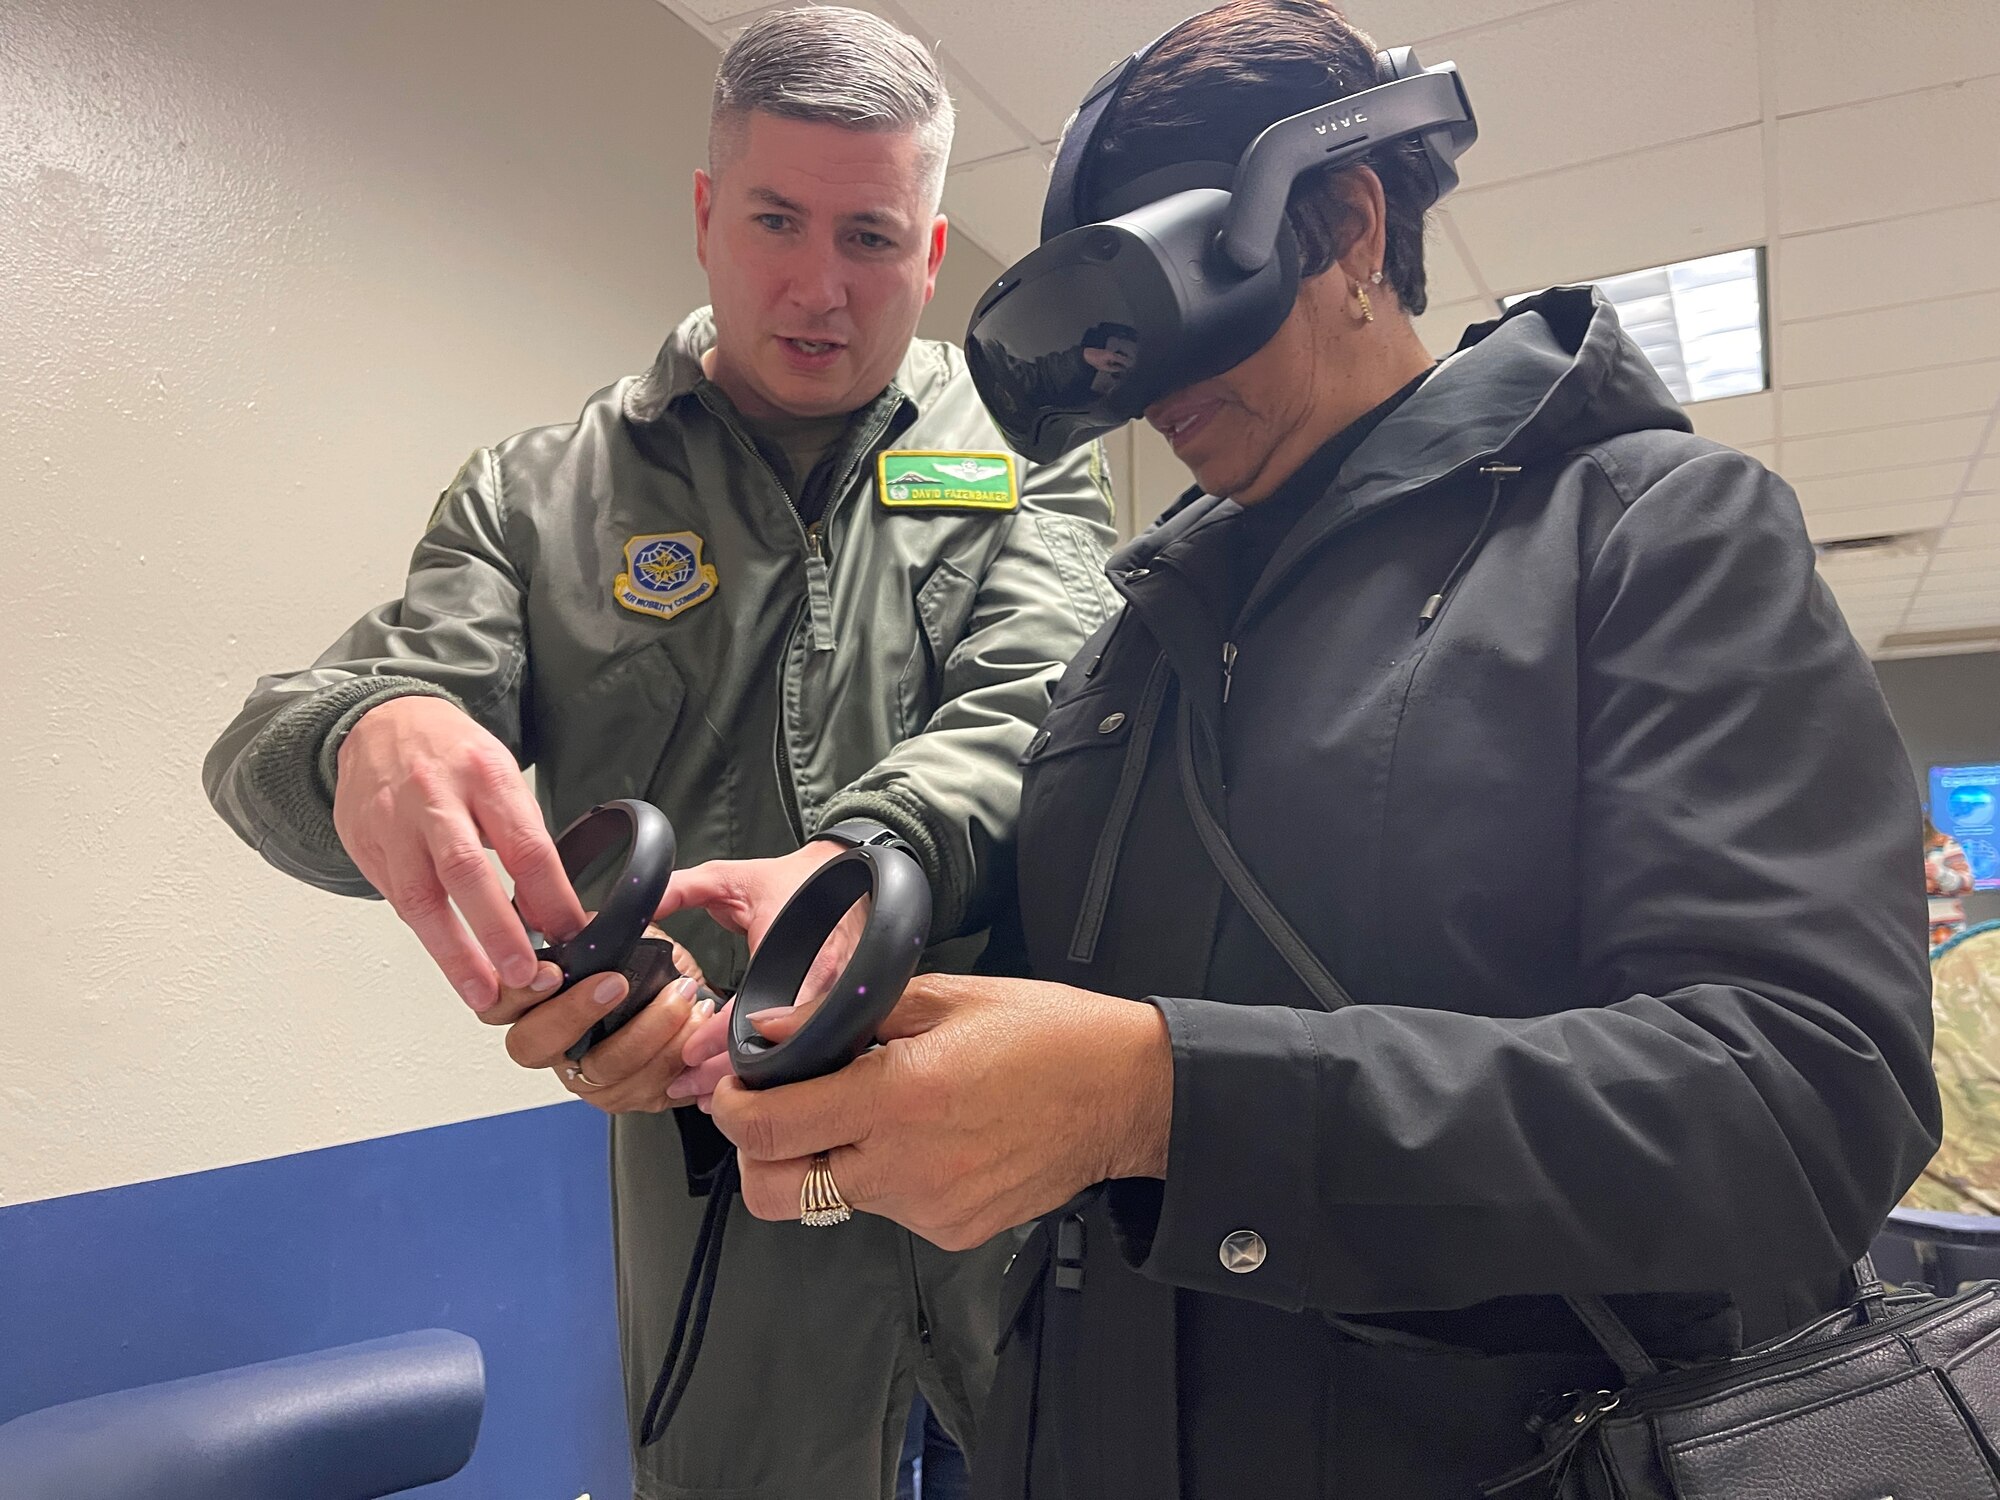 U.S. Air Force Col. David Fazenbaker, 62d Airlift Wing commander, guides Mary Moss, City of Lakewood deputy mayor and 62d AW Honorary Commander, on how to use virtual reality equipment during the McChord Civic Leader Tour at Sheppard Air Force Base, Texas, Feb. 7, 2013. The goal of the Civic Leader Tour was to educate local civic leaders on the way the Air Force trains America’s Airlift Wing Mobility Warfighters and show the different Air Force technical school training programs for C-17 Globemaster III pilots, maintainers, and loadmasters. (U.S. Air Force photo by Master Sgt. Julius Delos Reyes)